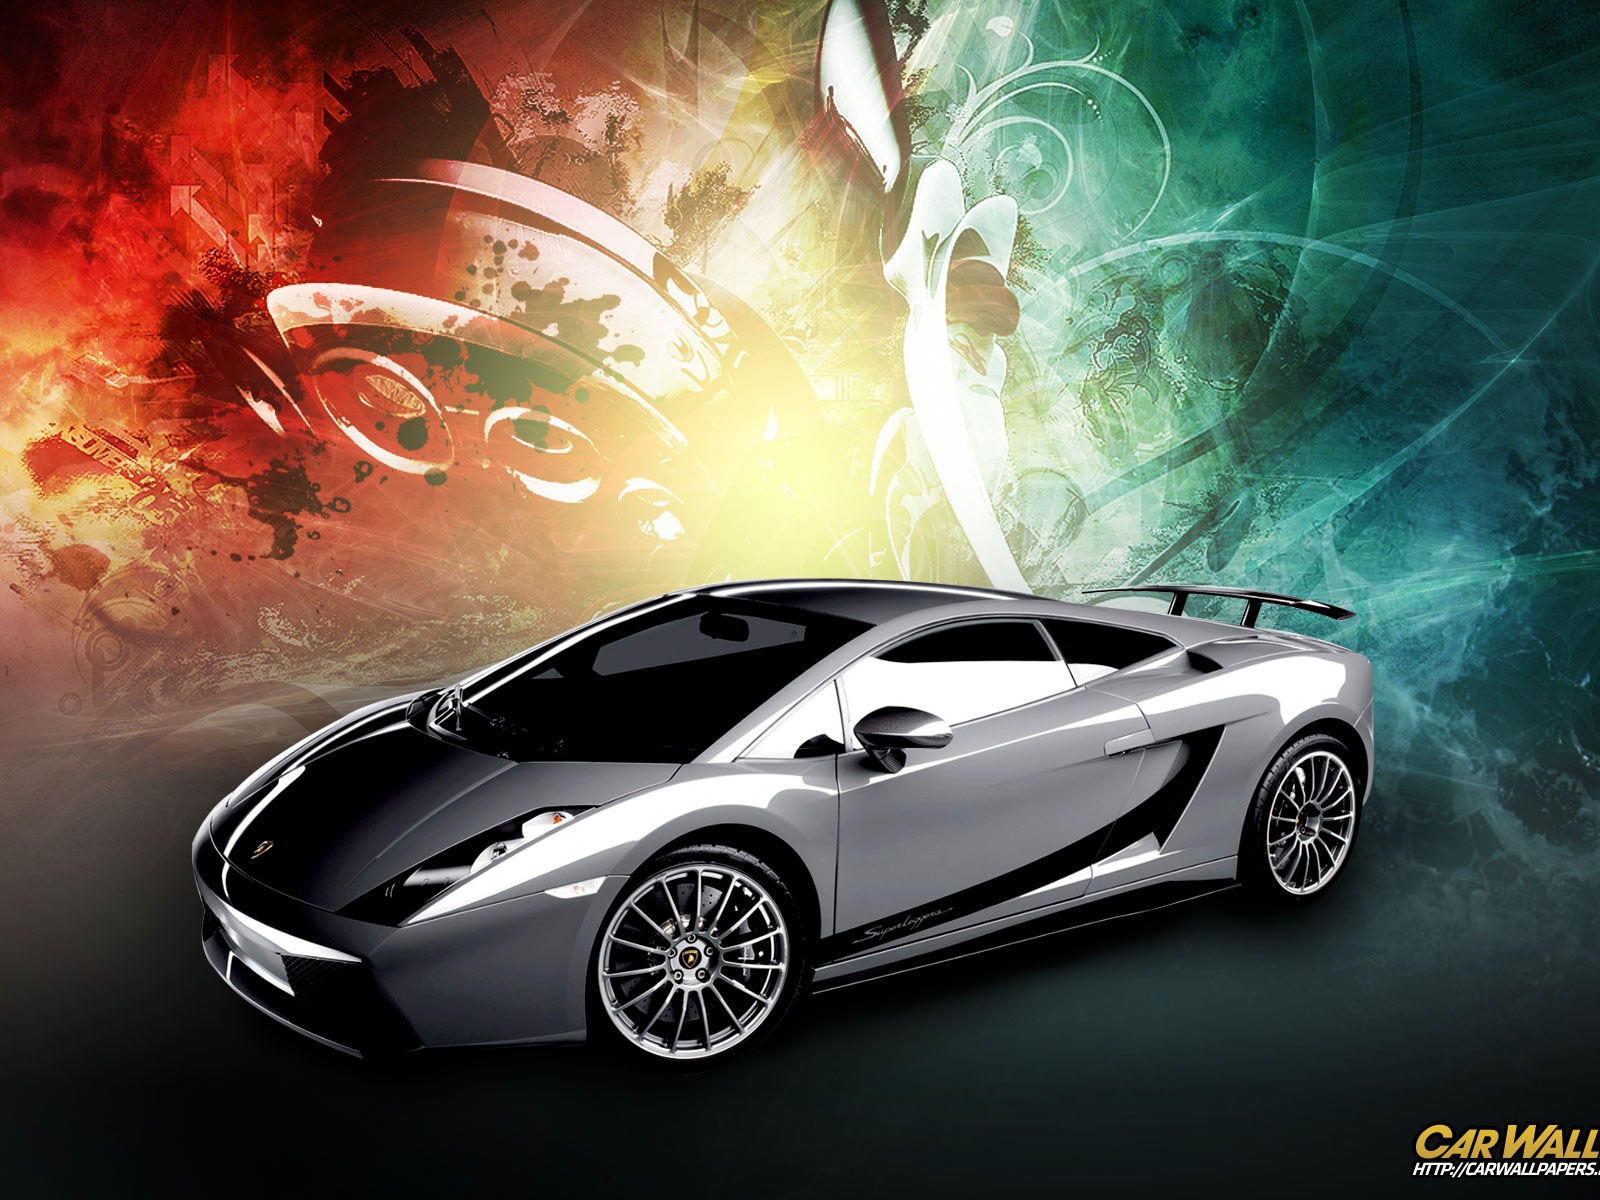 Auto Collection Wallpapers (60) #15 - 1600x1200